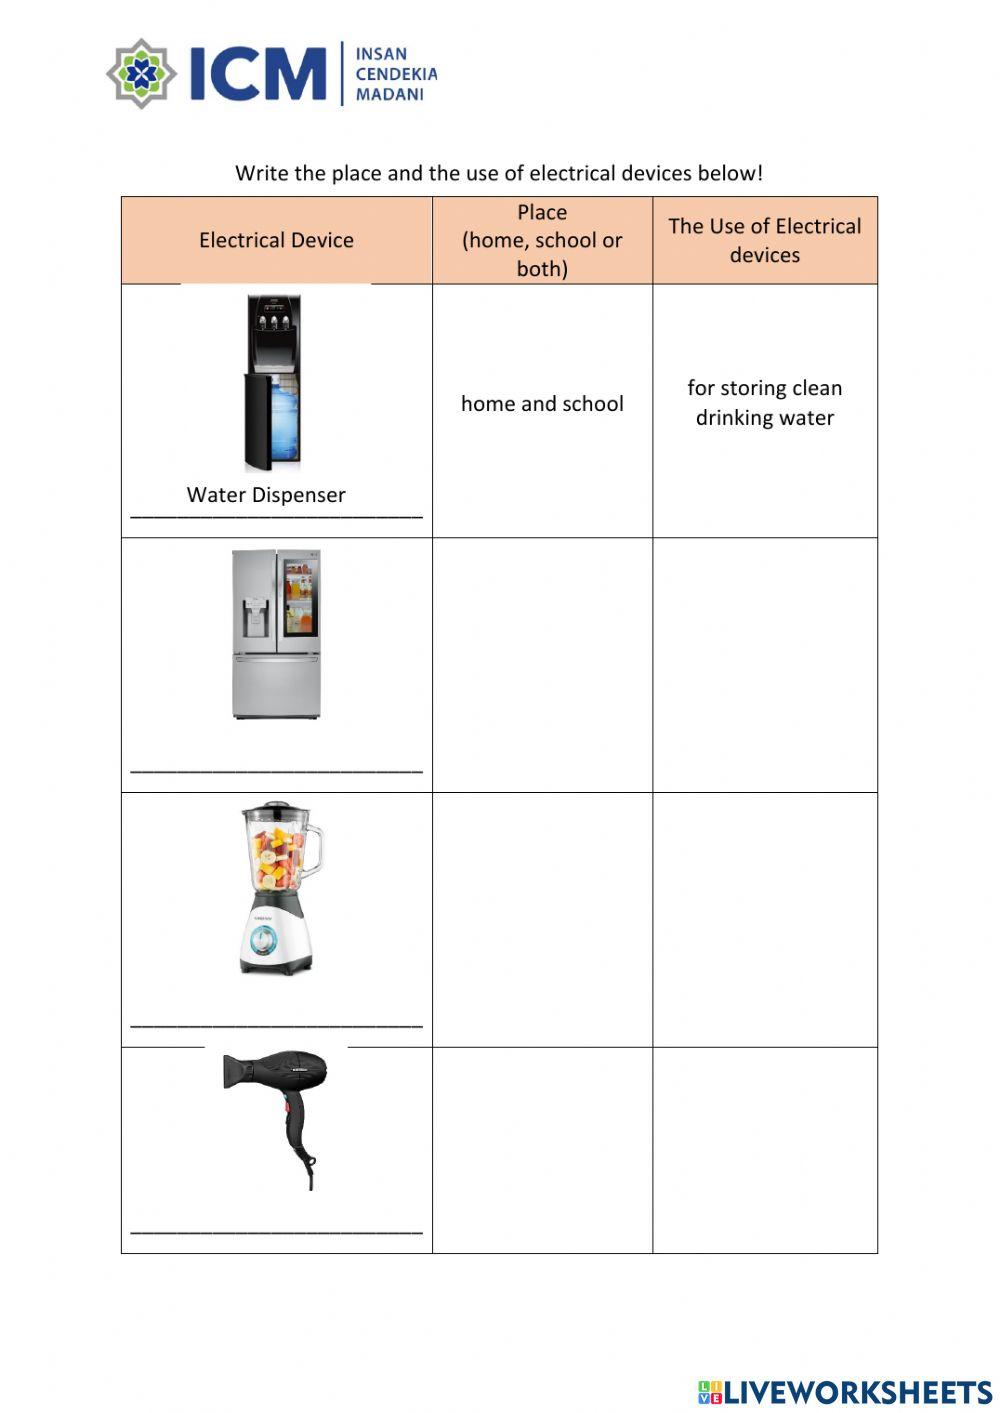 The uses of electrical appliances at home and school